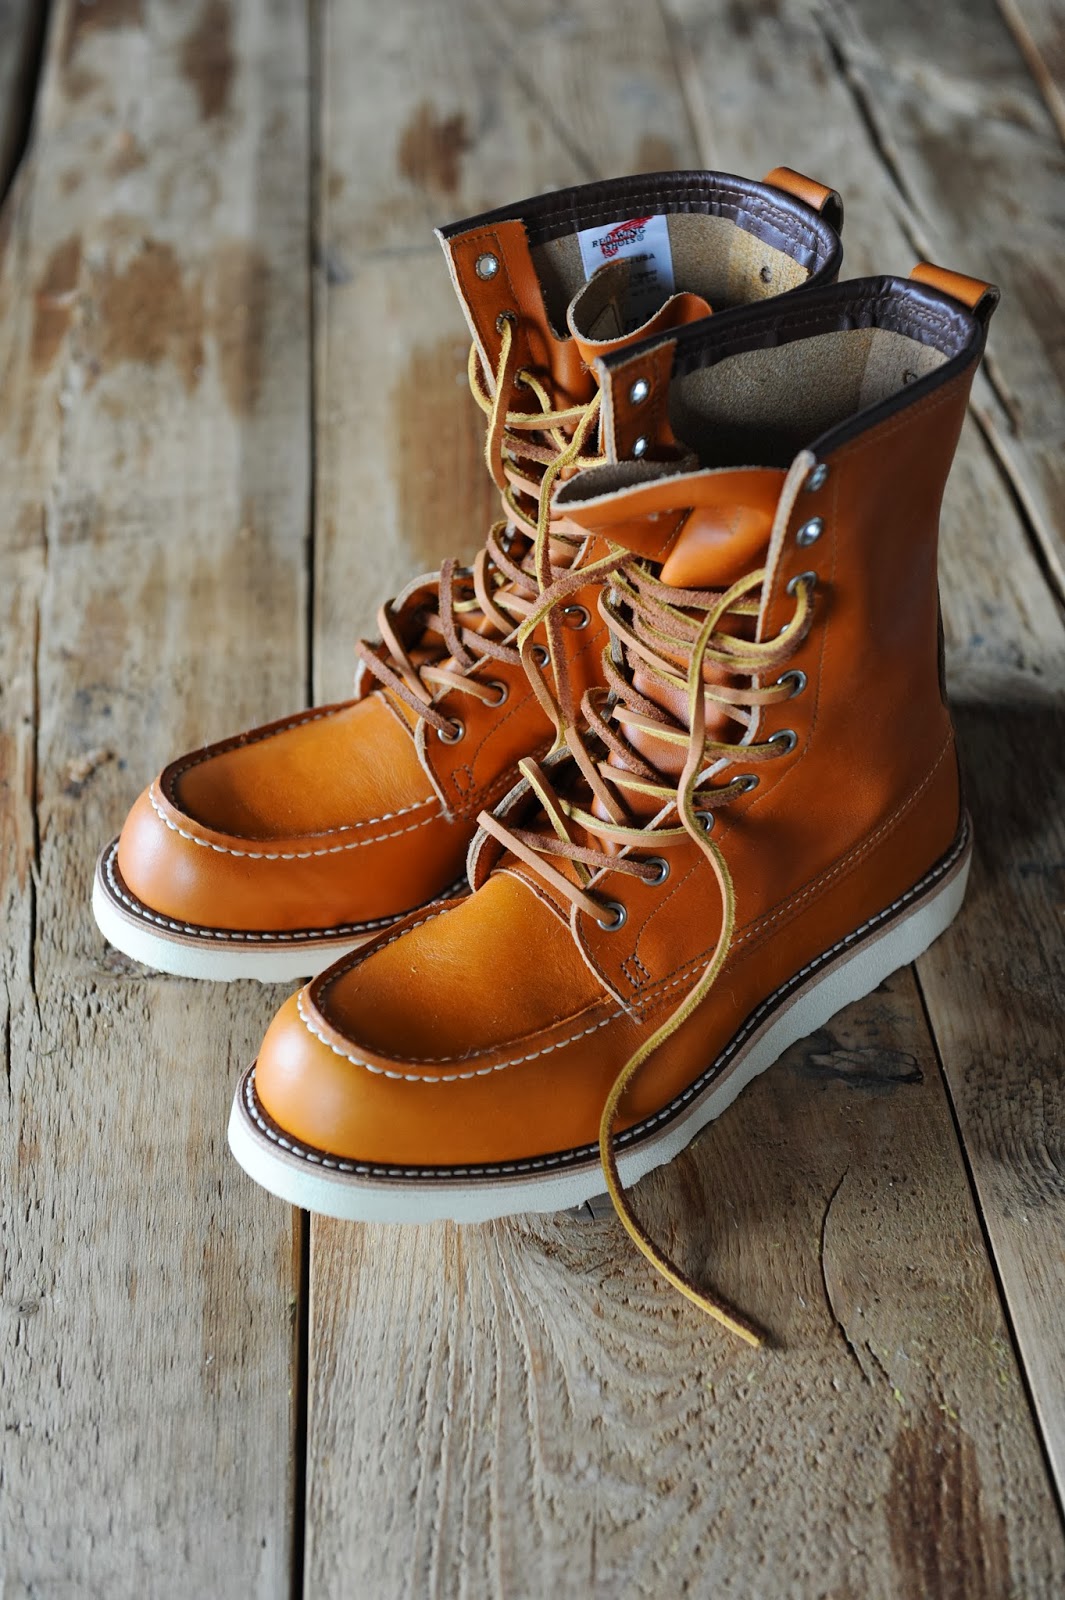 DSC_3995.jpg 1,065×1,600 pixels (With images) | Red wing boots, Moc toe ...